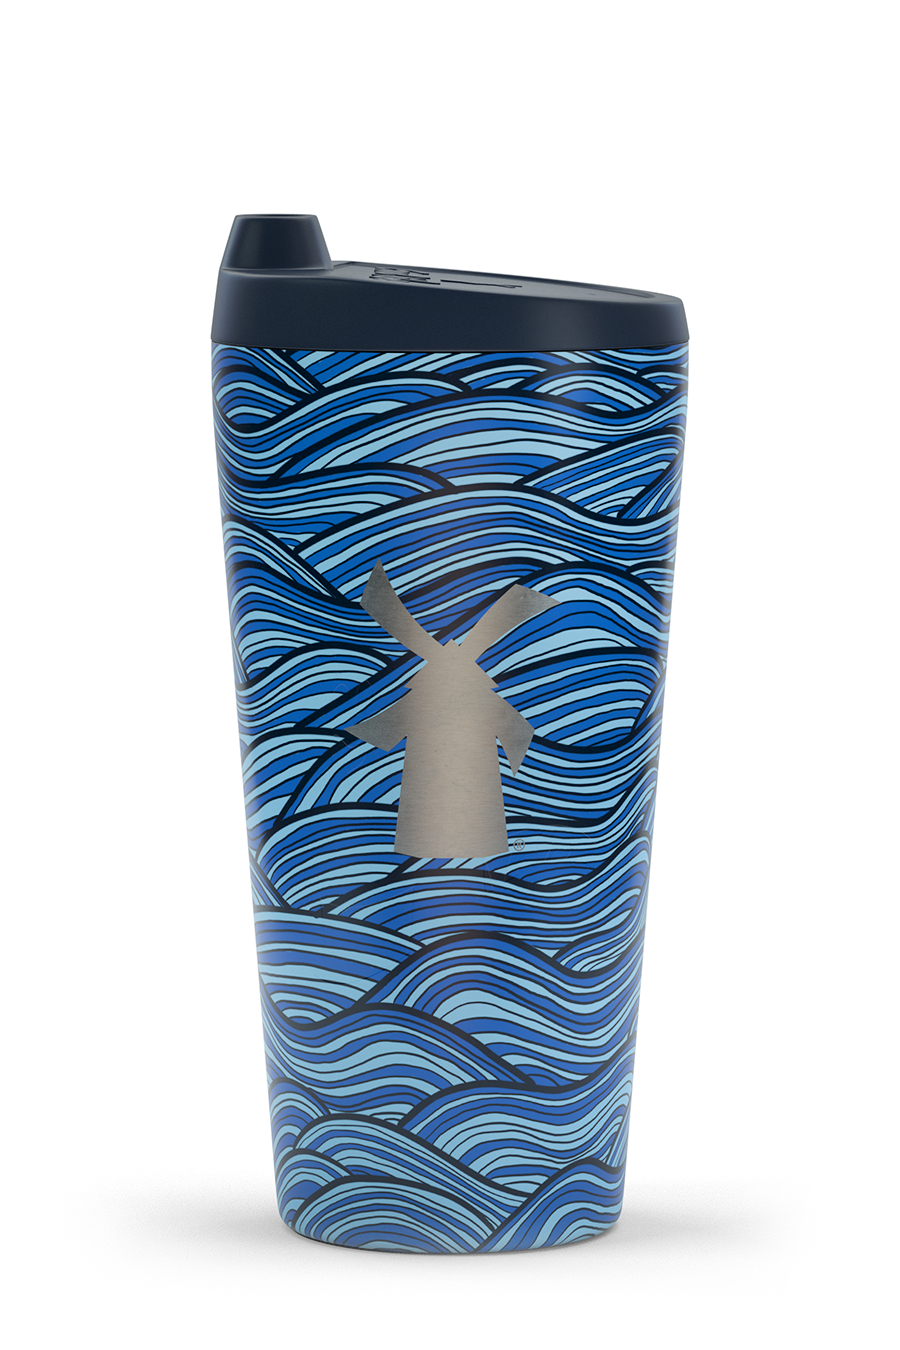 Dutch Stainless Steel Tumbler - Waves